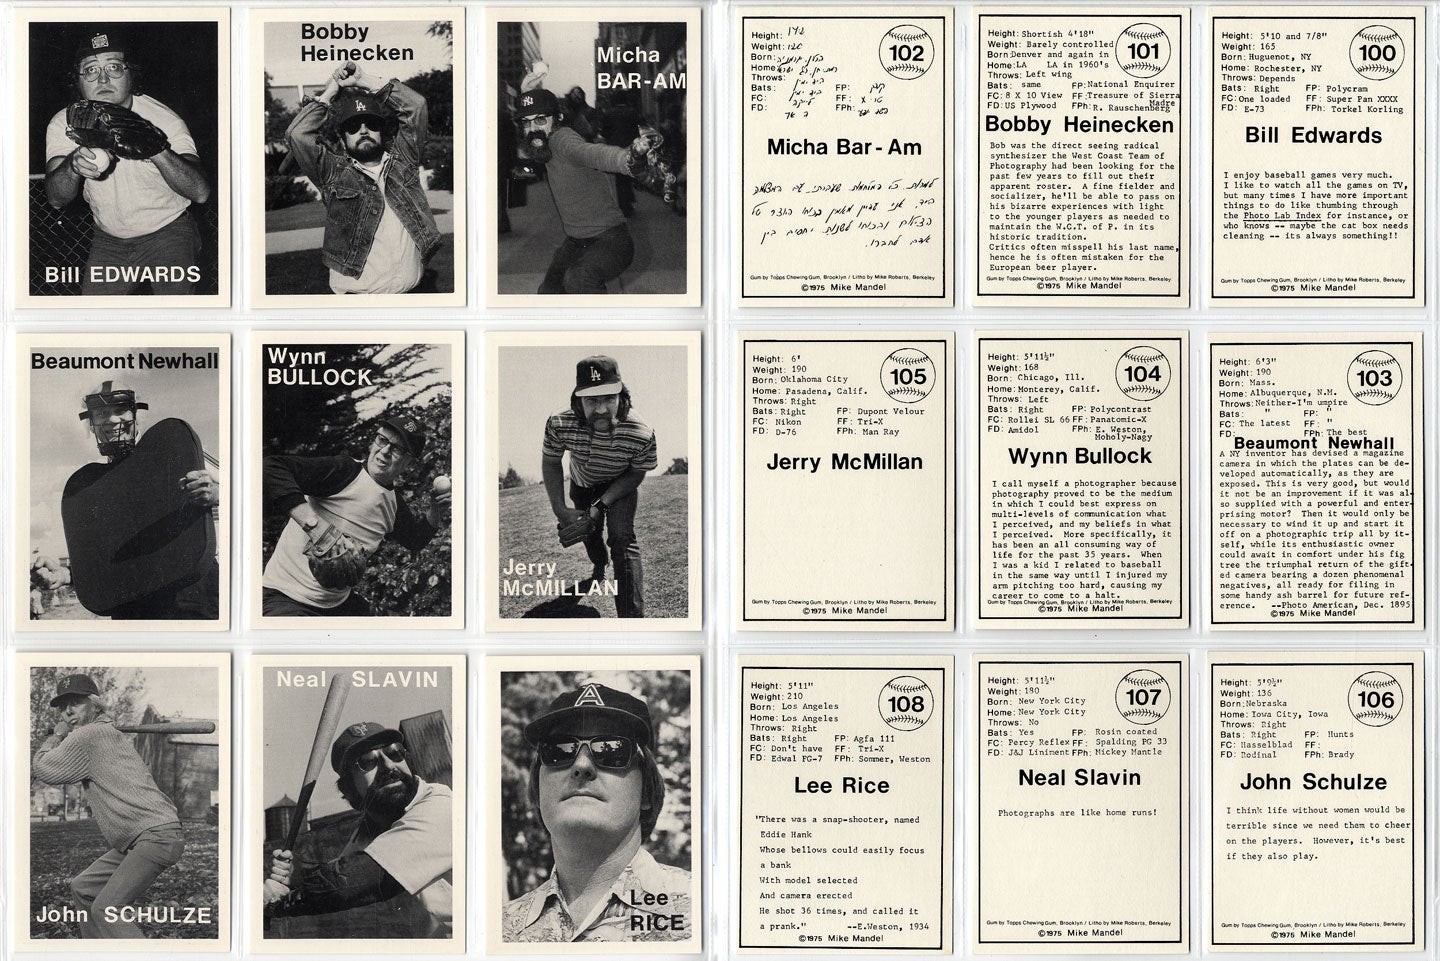 Mike Mandel: Untitled (Baseball-Photographer Trading Cards), Complete Set of 135 Cards (As New)